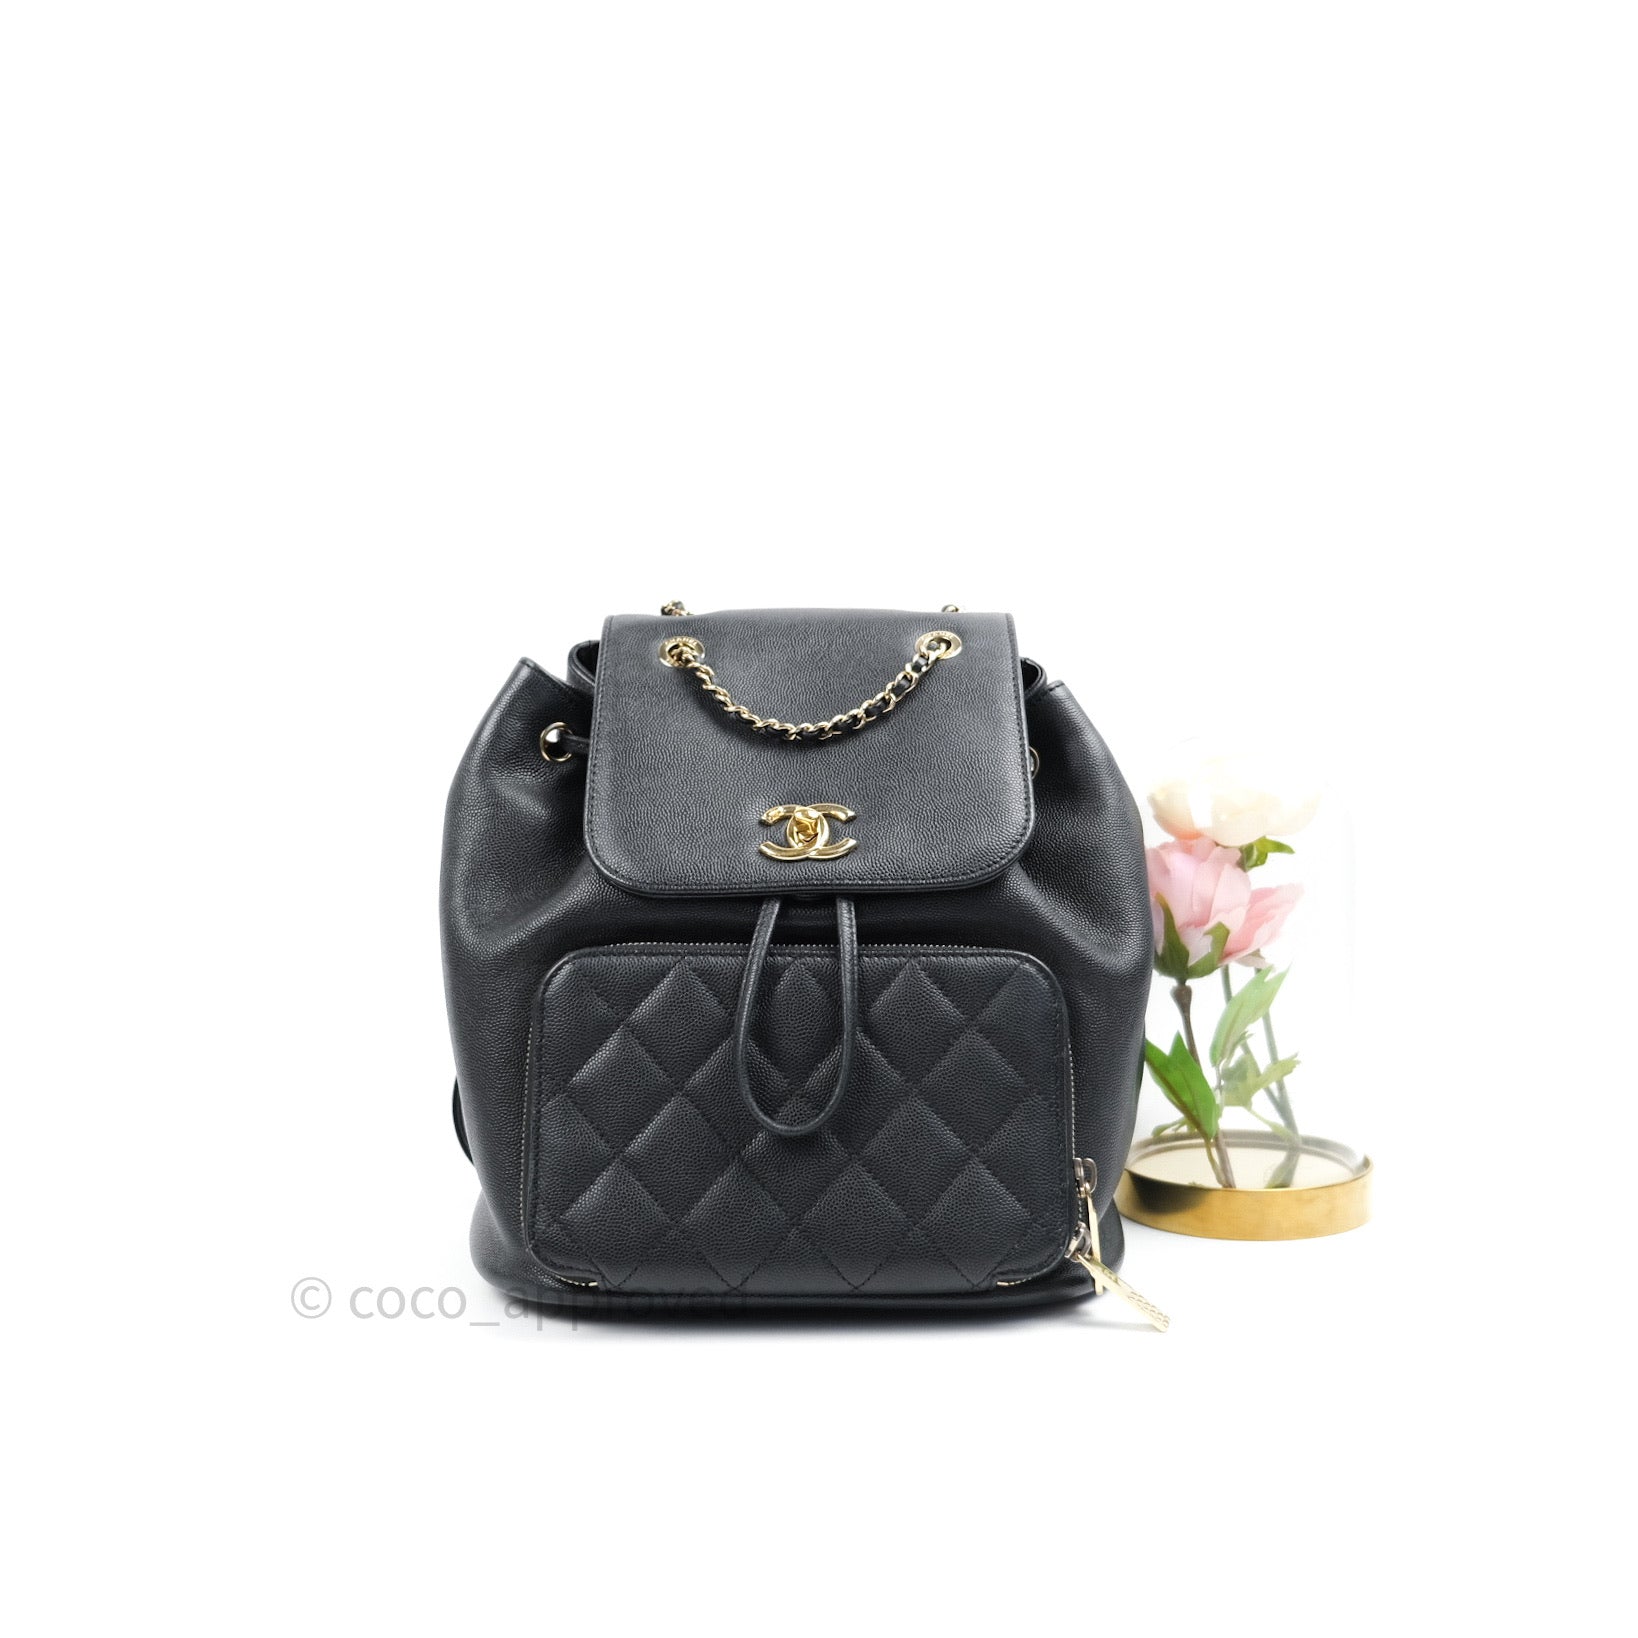 CHANEL, WHITE CAVIAR AFFINITY BACKPACK WITH LIGHT GOLD TONE HARDWARE, Handbags & Accessories, 2020